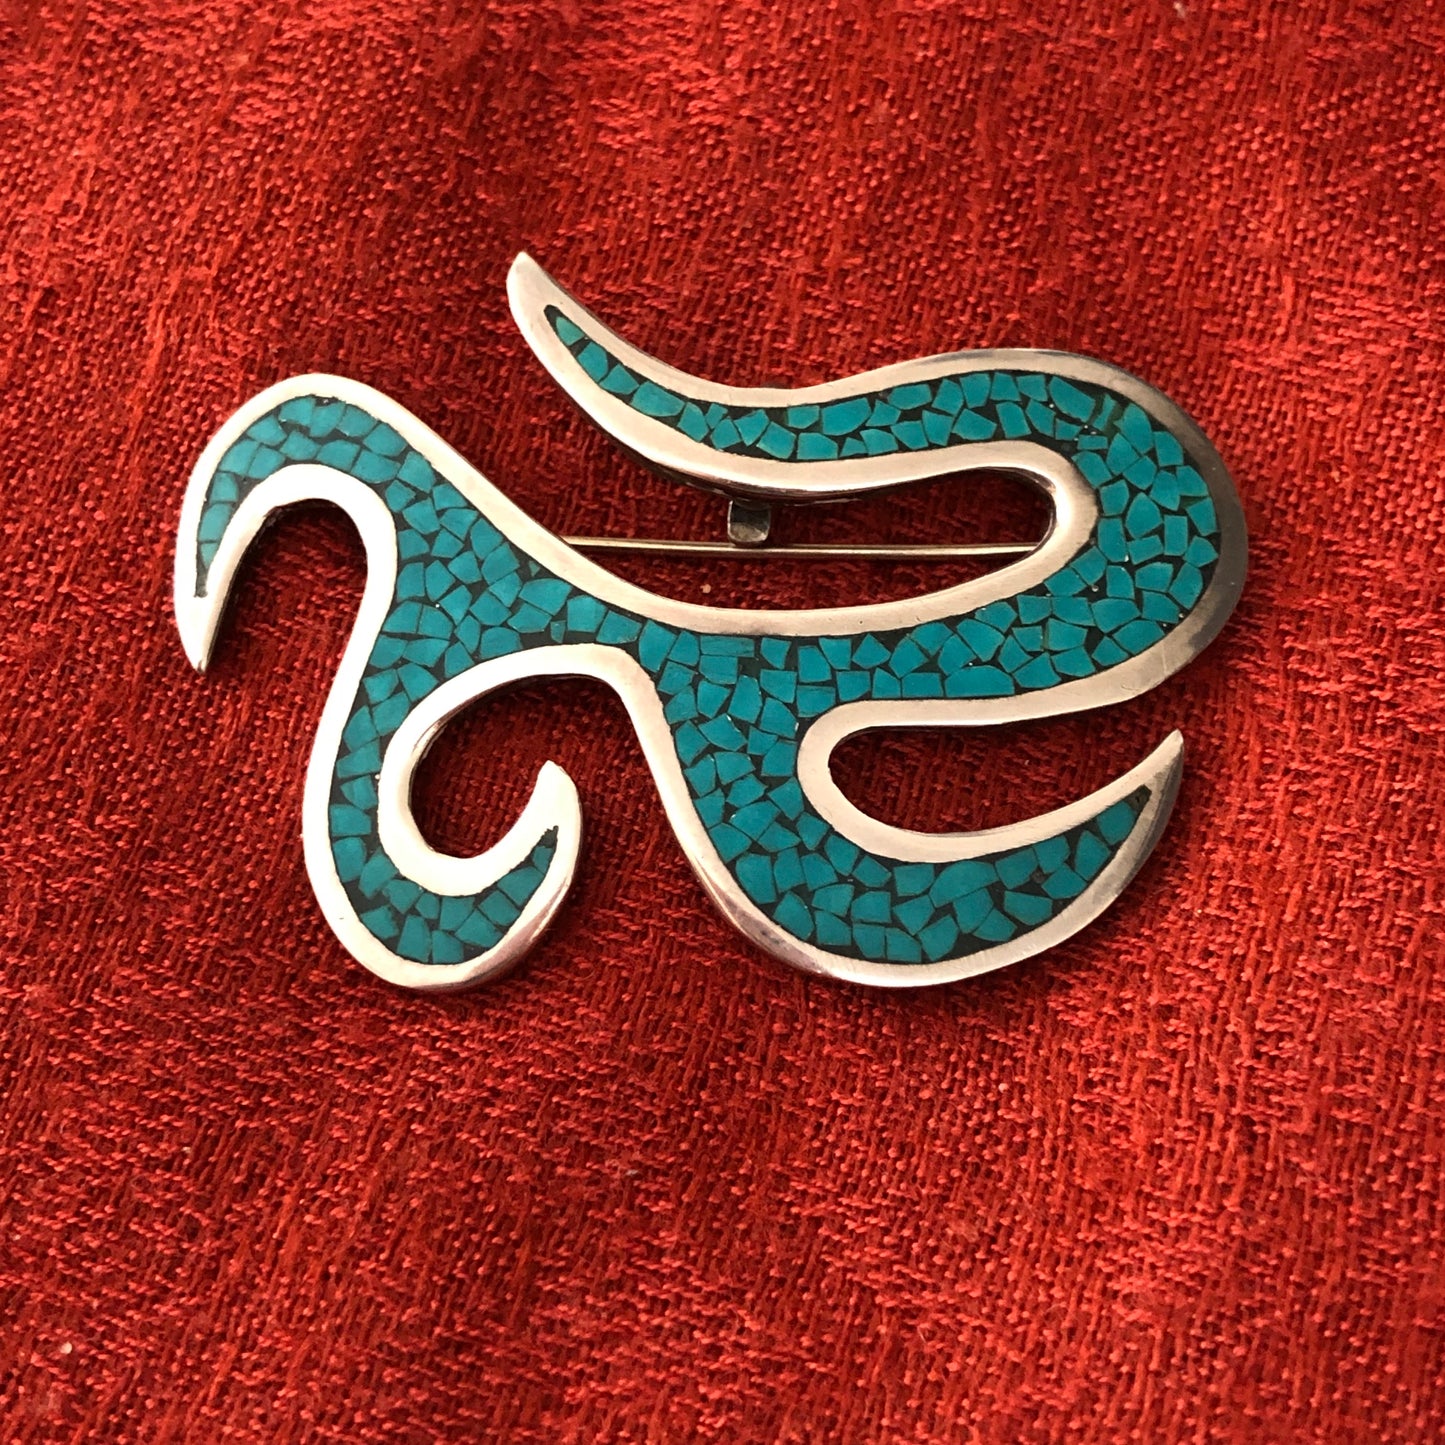 Arte en Plata Sterling Silver and Turquoise Brooch/Pendant